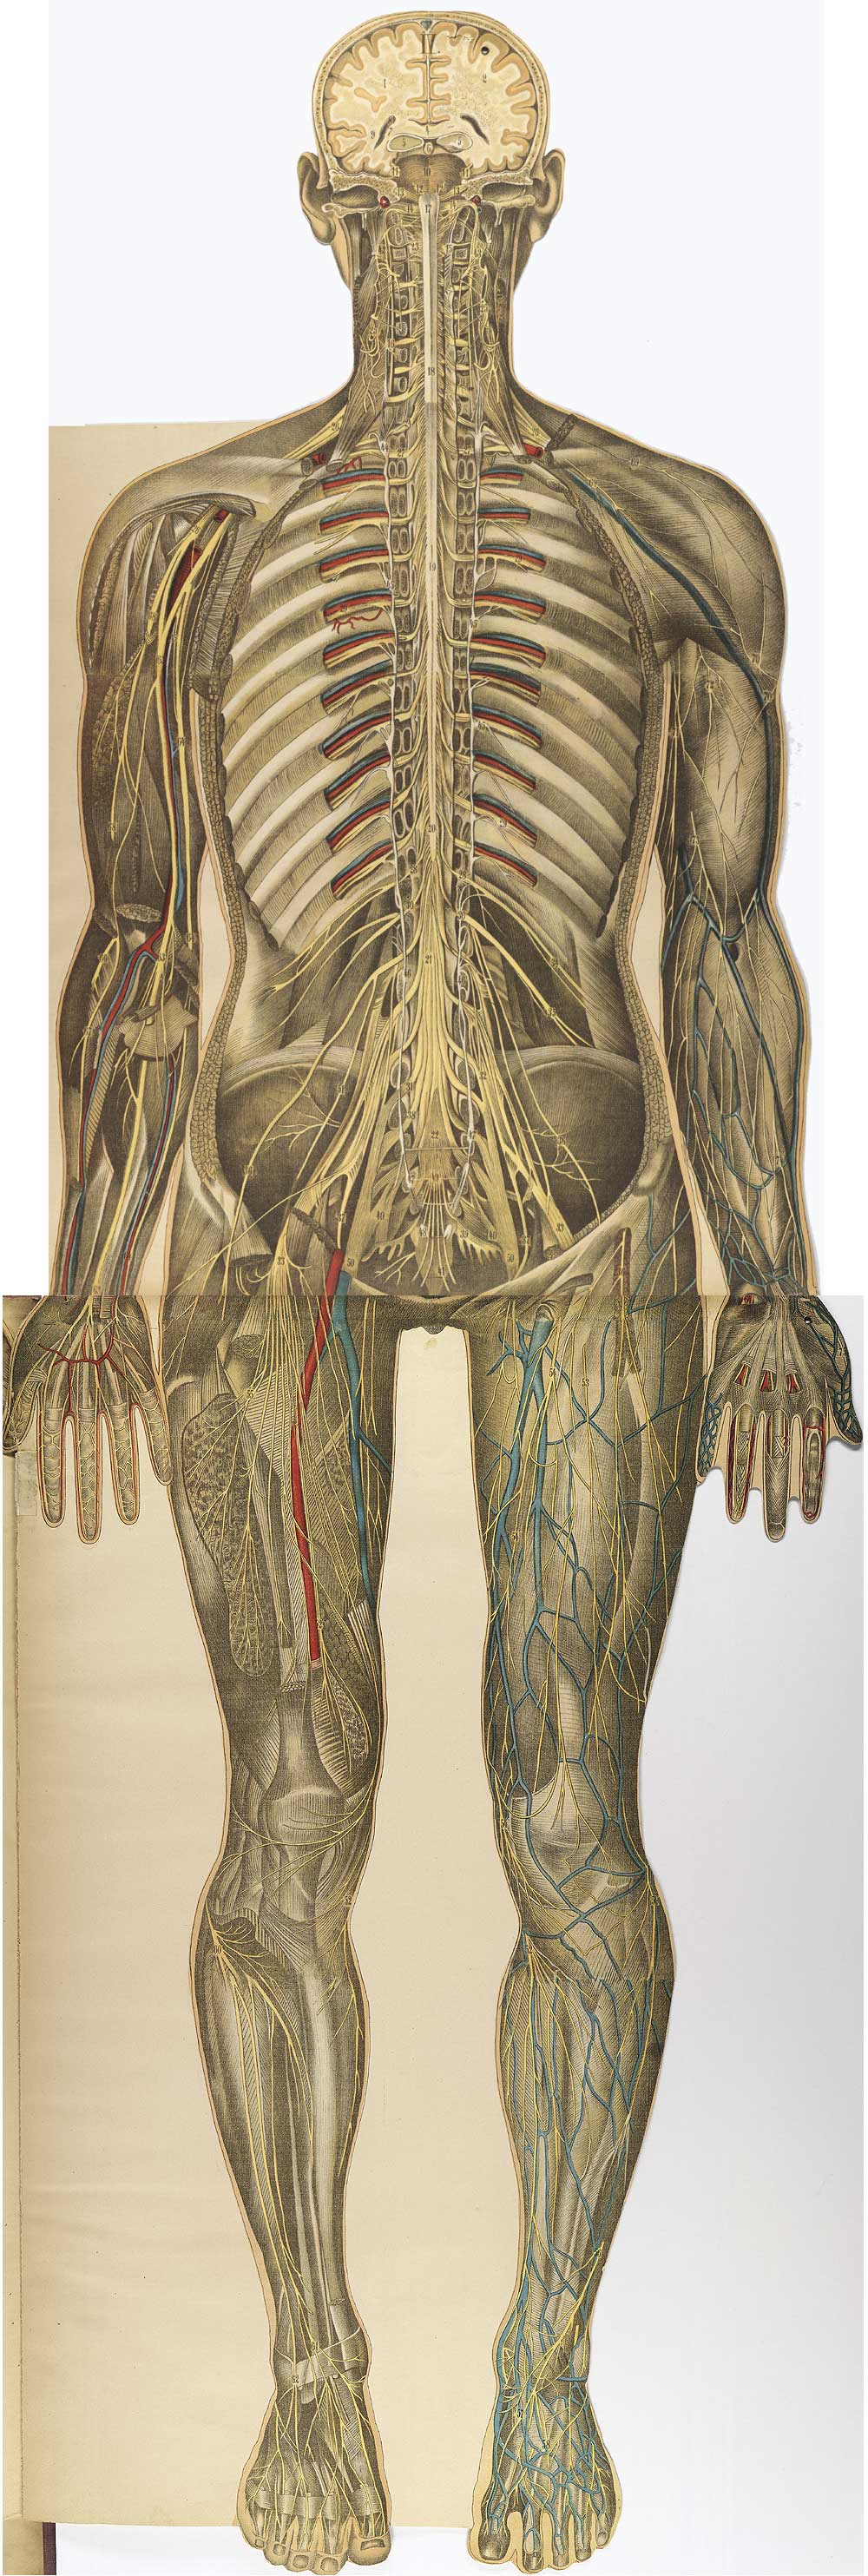 Chromolithograph showing the arterial and venous of the back of the human body, from Julien Bouglé’s Le corps humain en grandeur naturelle, NLM Call no. WE B758c 1899.